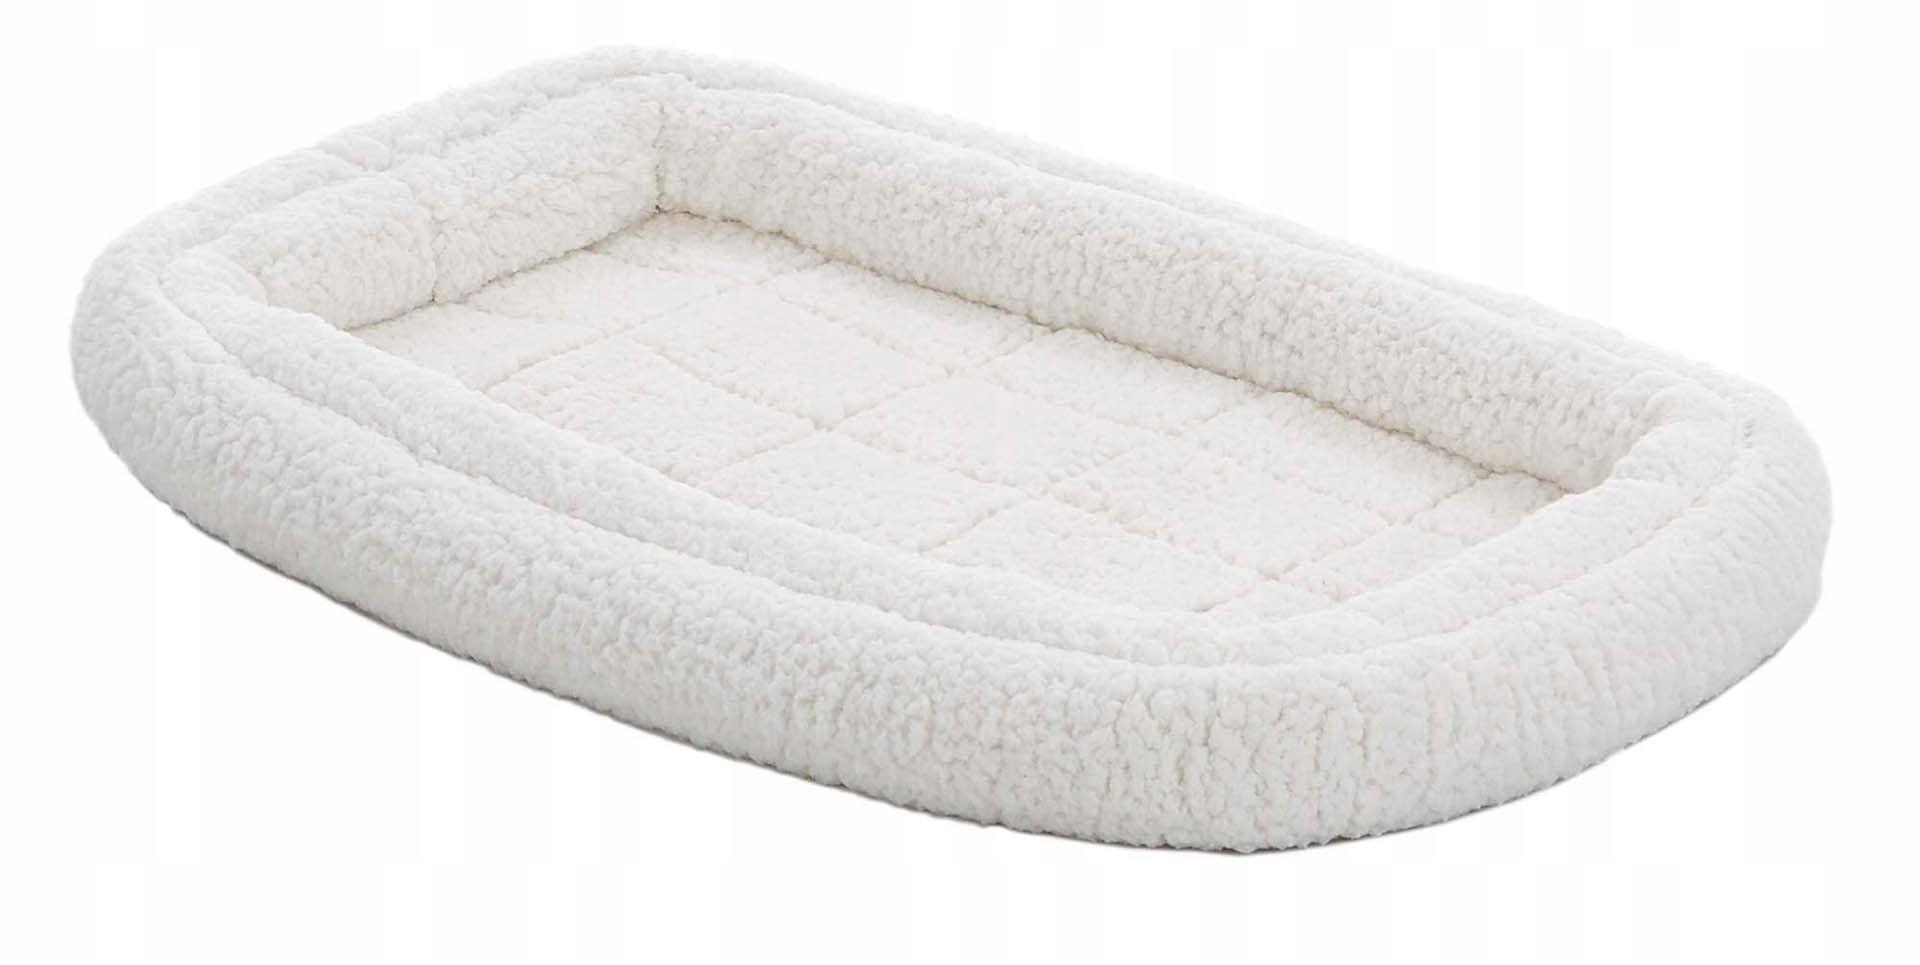 Midwest QuietTime Double Bolster Bed - 24"